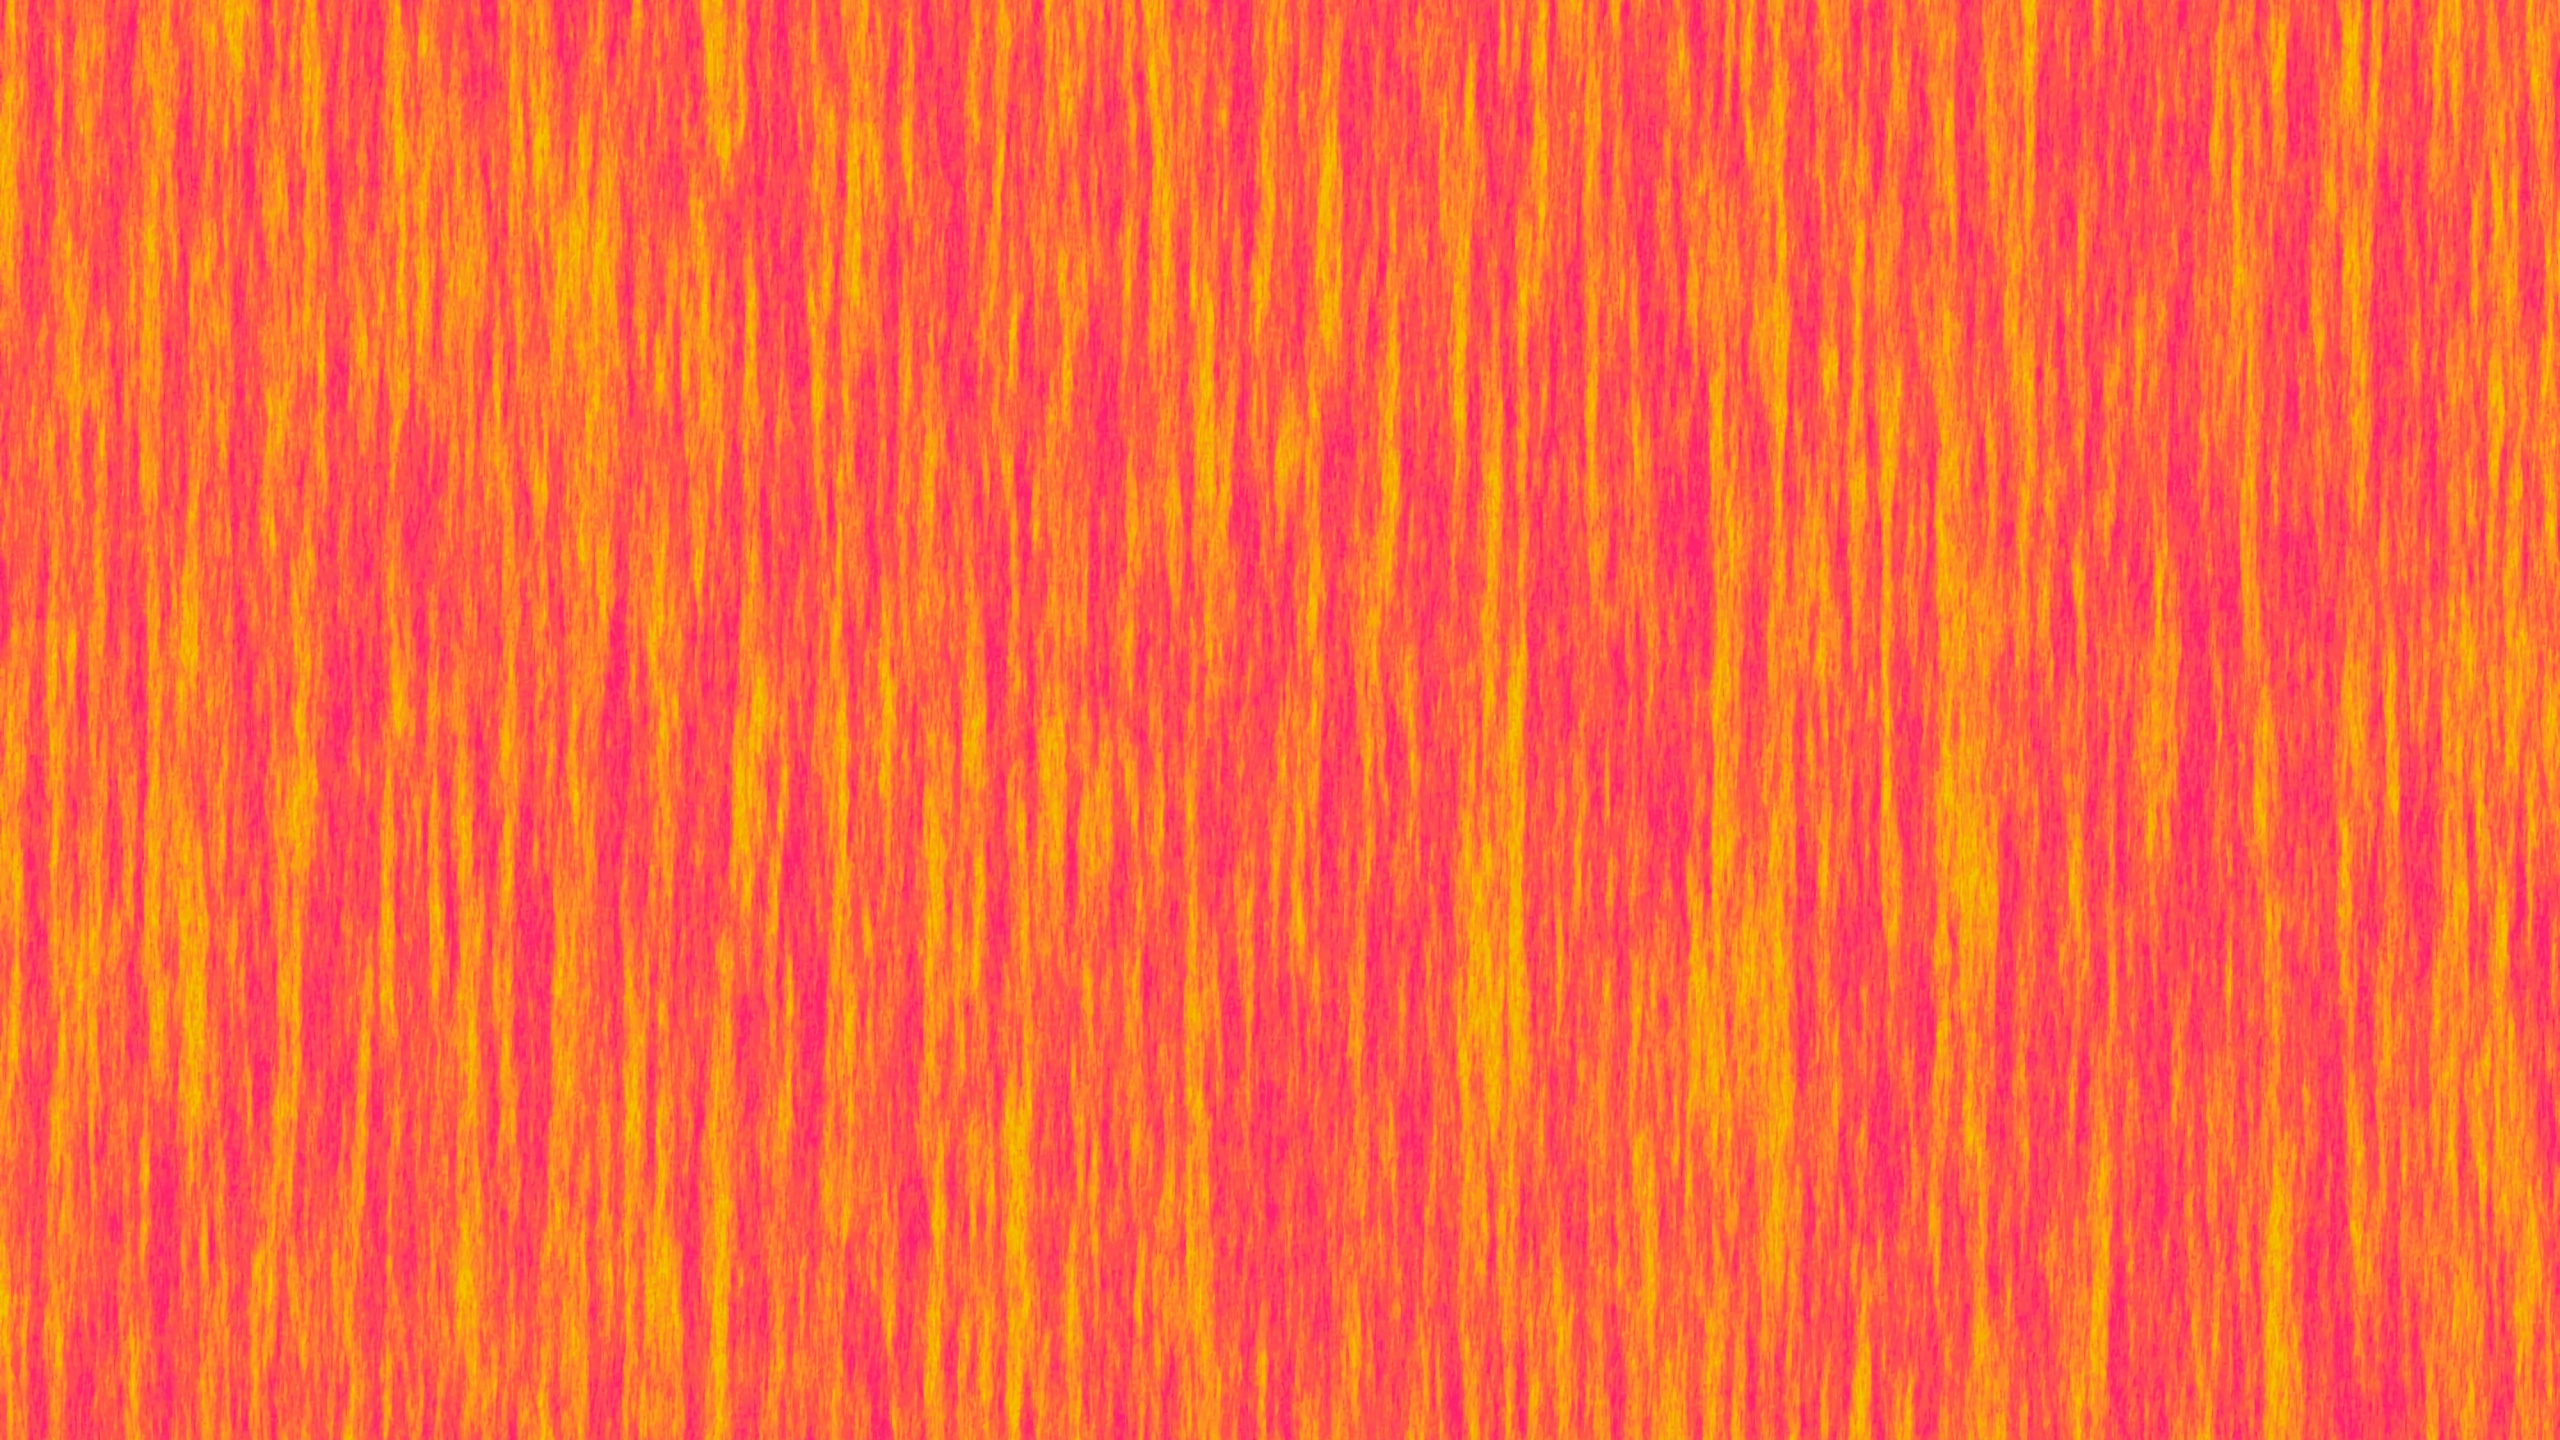 Orange and Yellow Striped Textile. Wallpaper in 2560x1440 Resolution